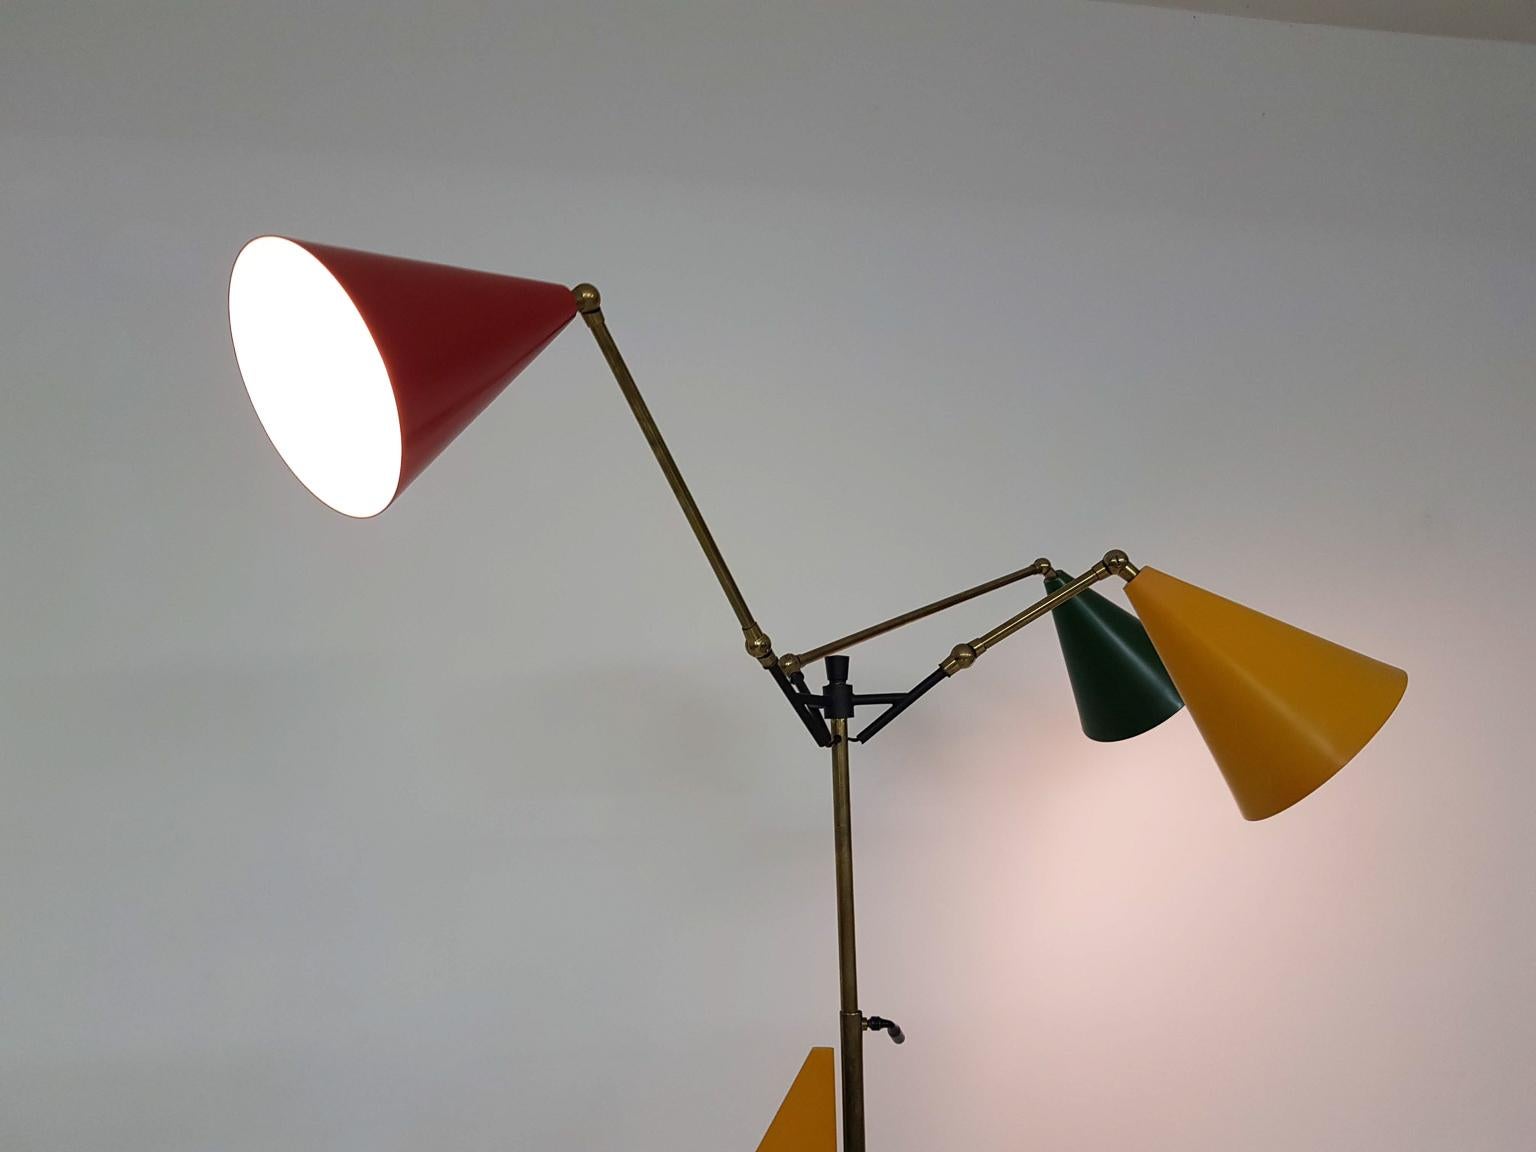 Exceptional Colorful Italian Midcentury Floor Light Attributed to Arredoluce For Sale 4